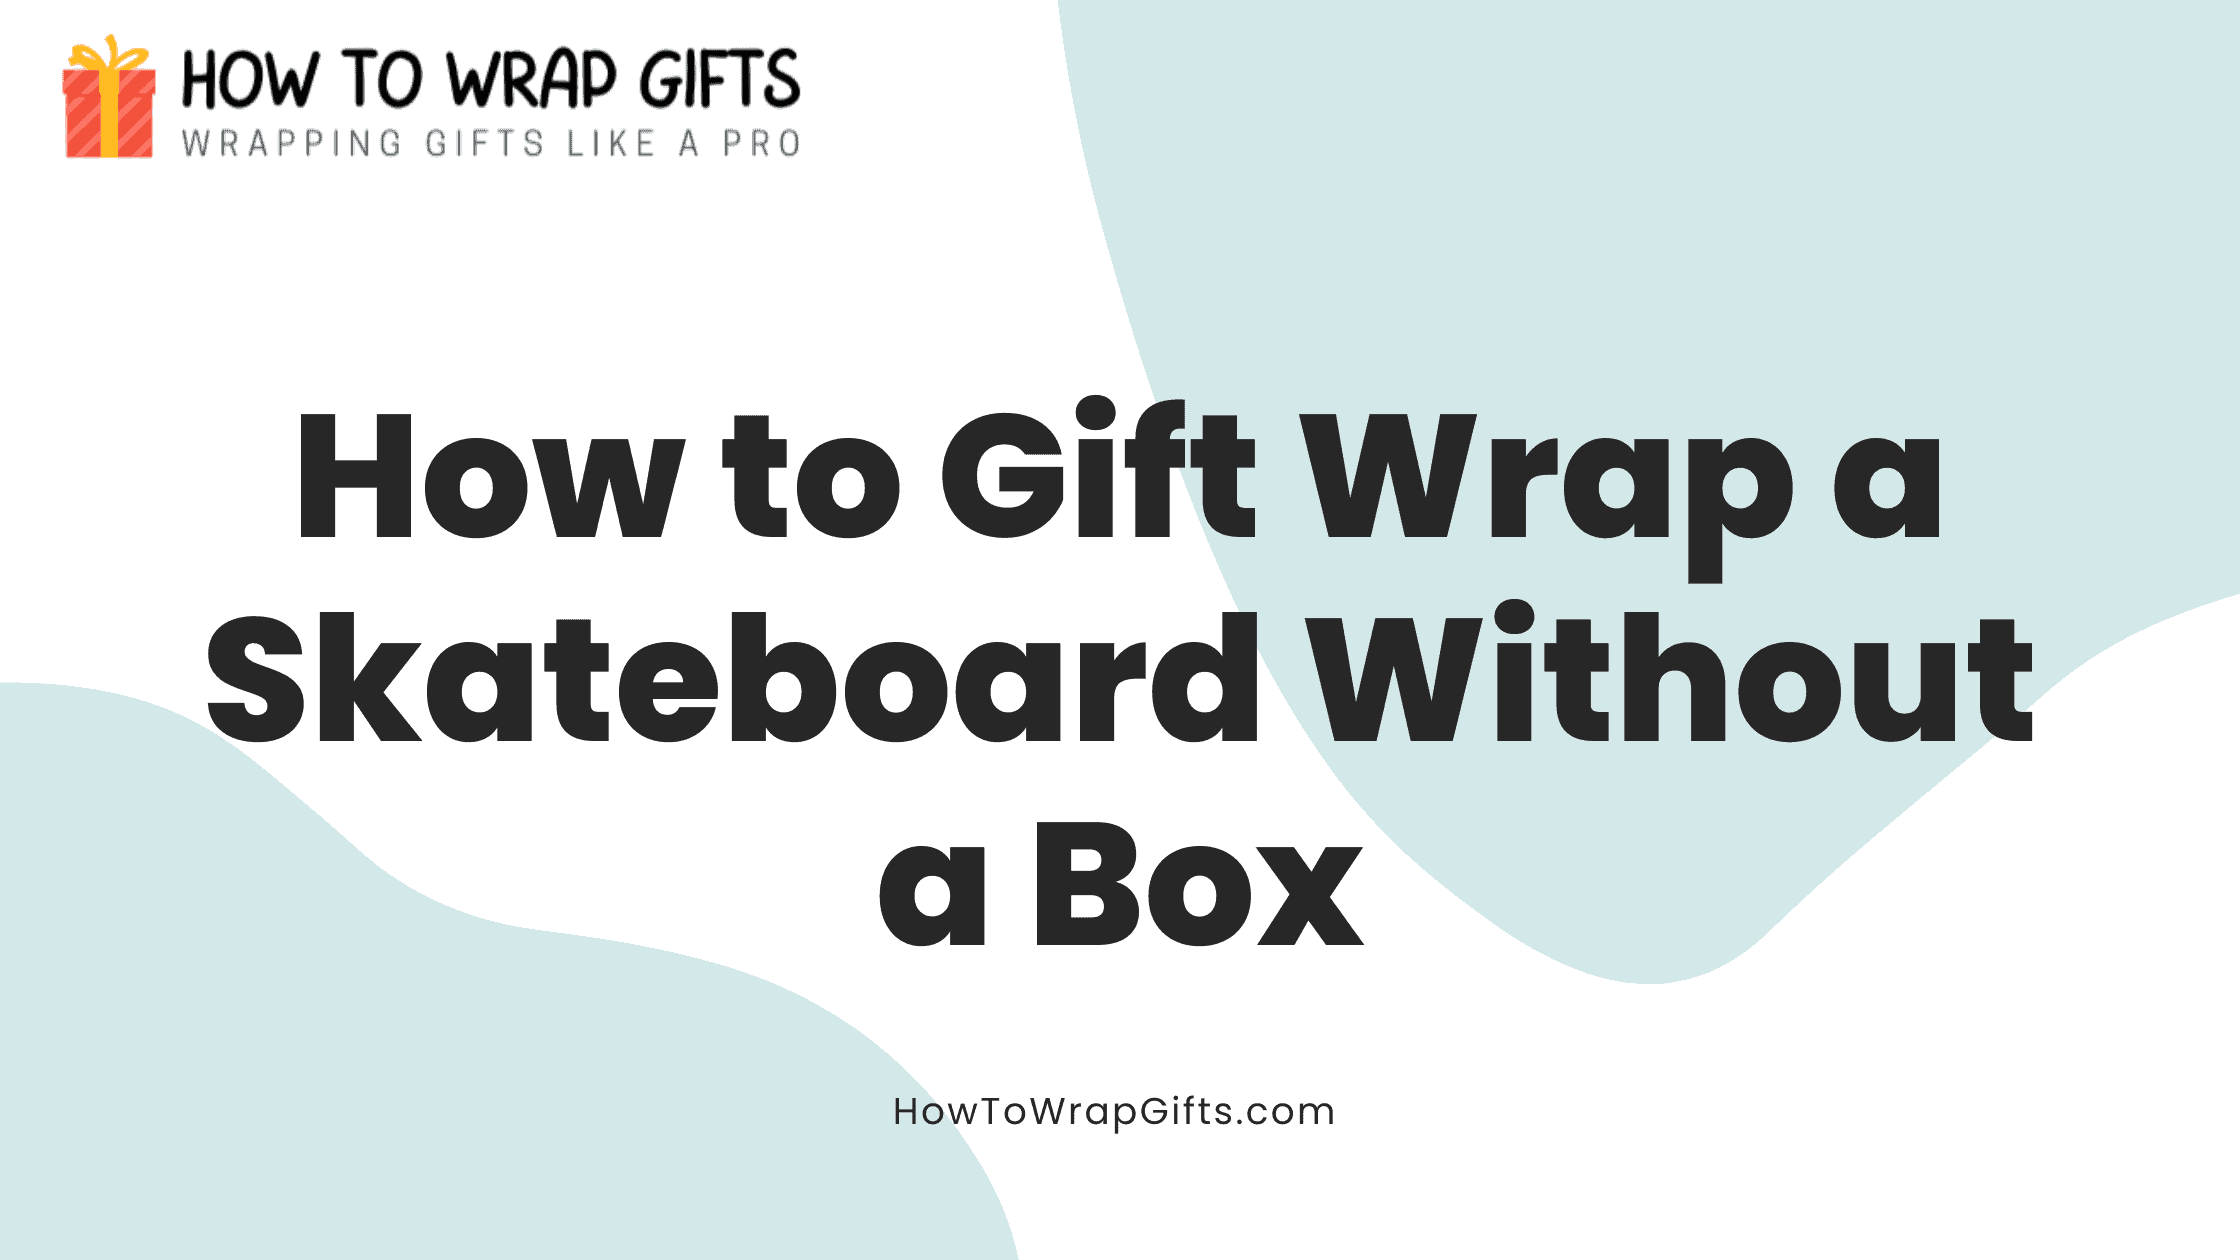 How to Gift Wrap a Skateboard Without a Box